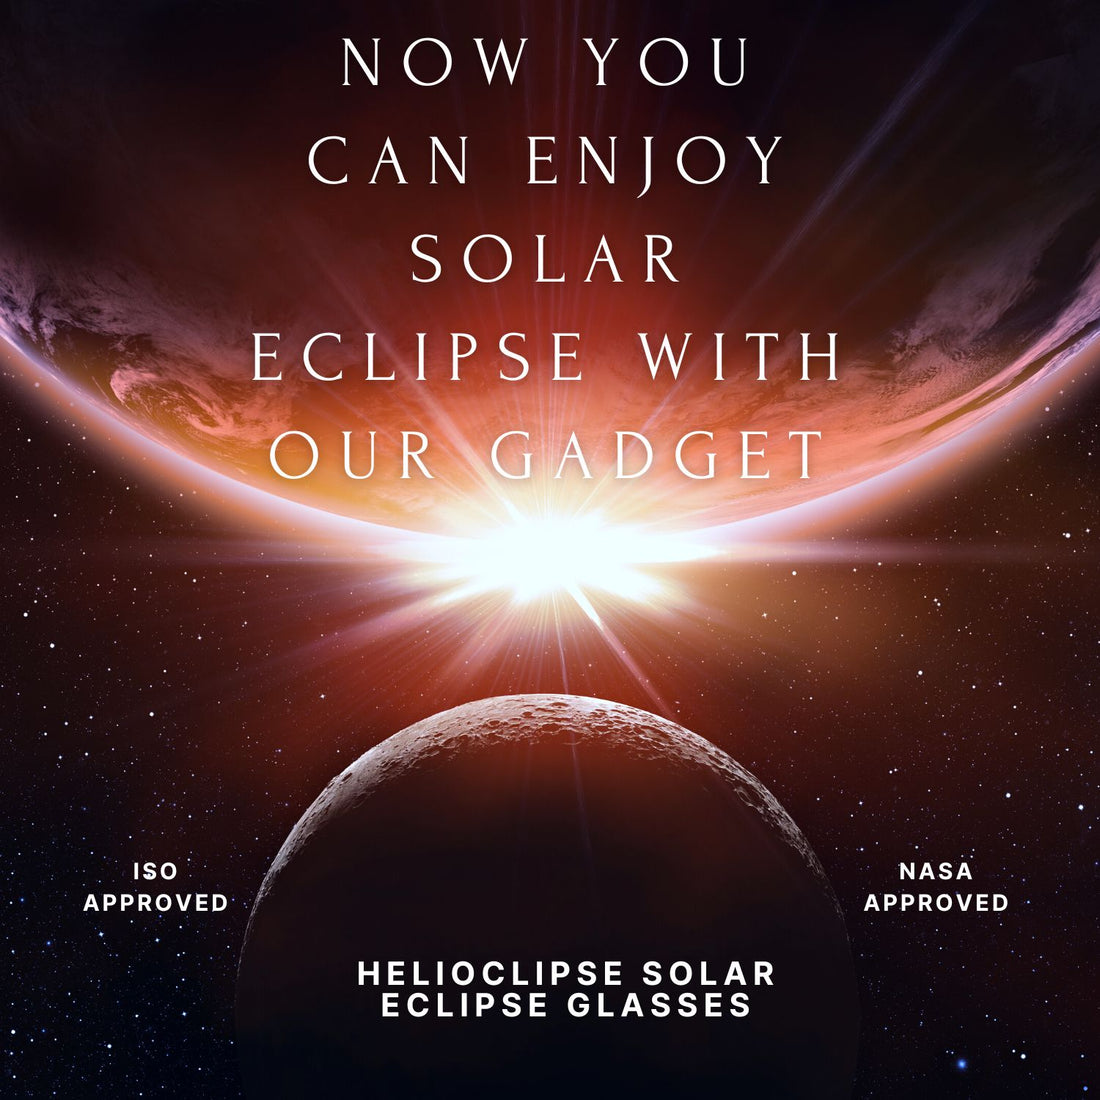 Why Do I need Helioclipse Solar Eclipse Glasses To View An Eclipse?